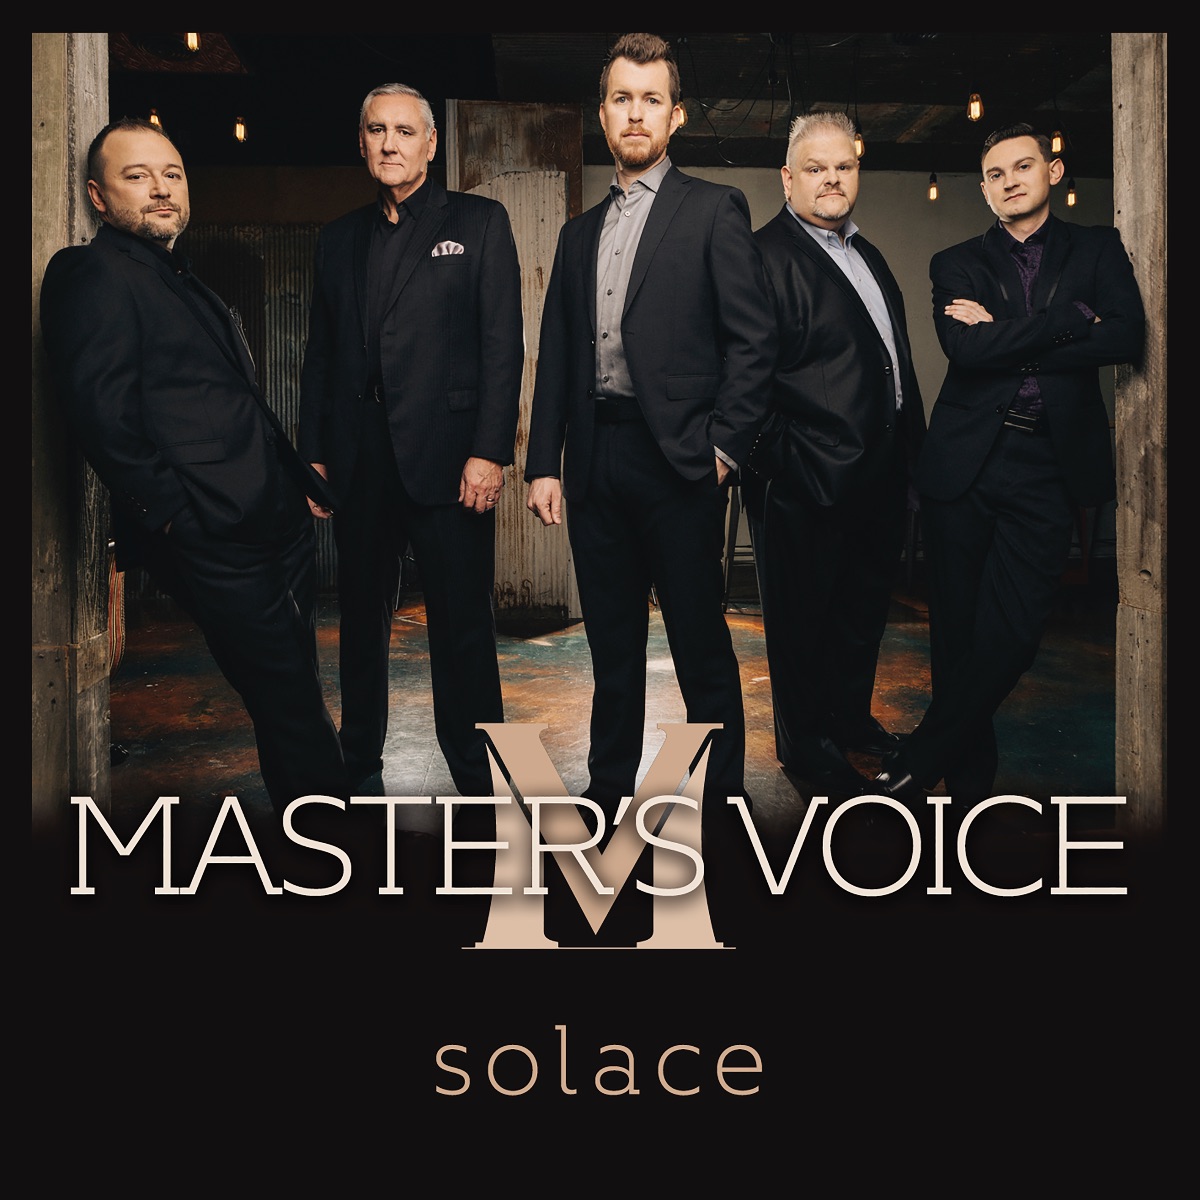 Master's Voice finds 'Solace' in God's word on latest album